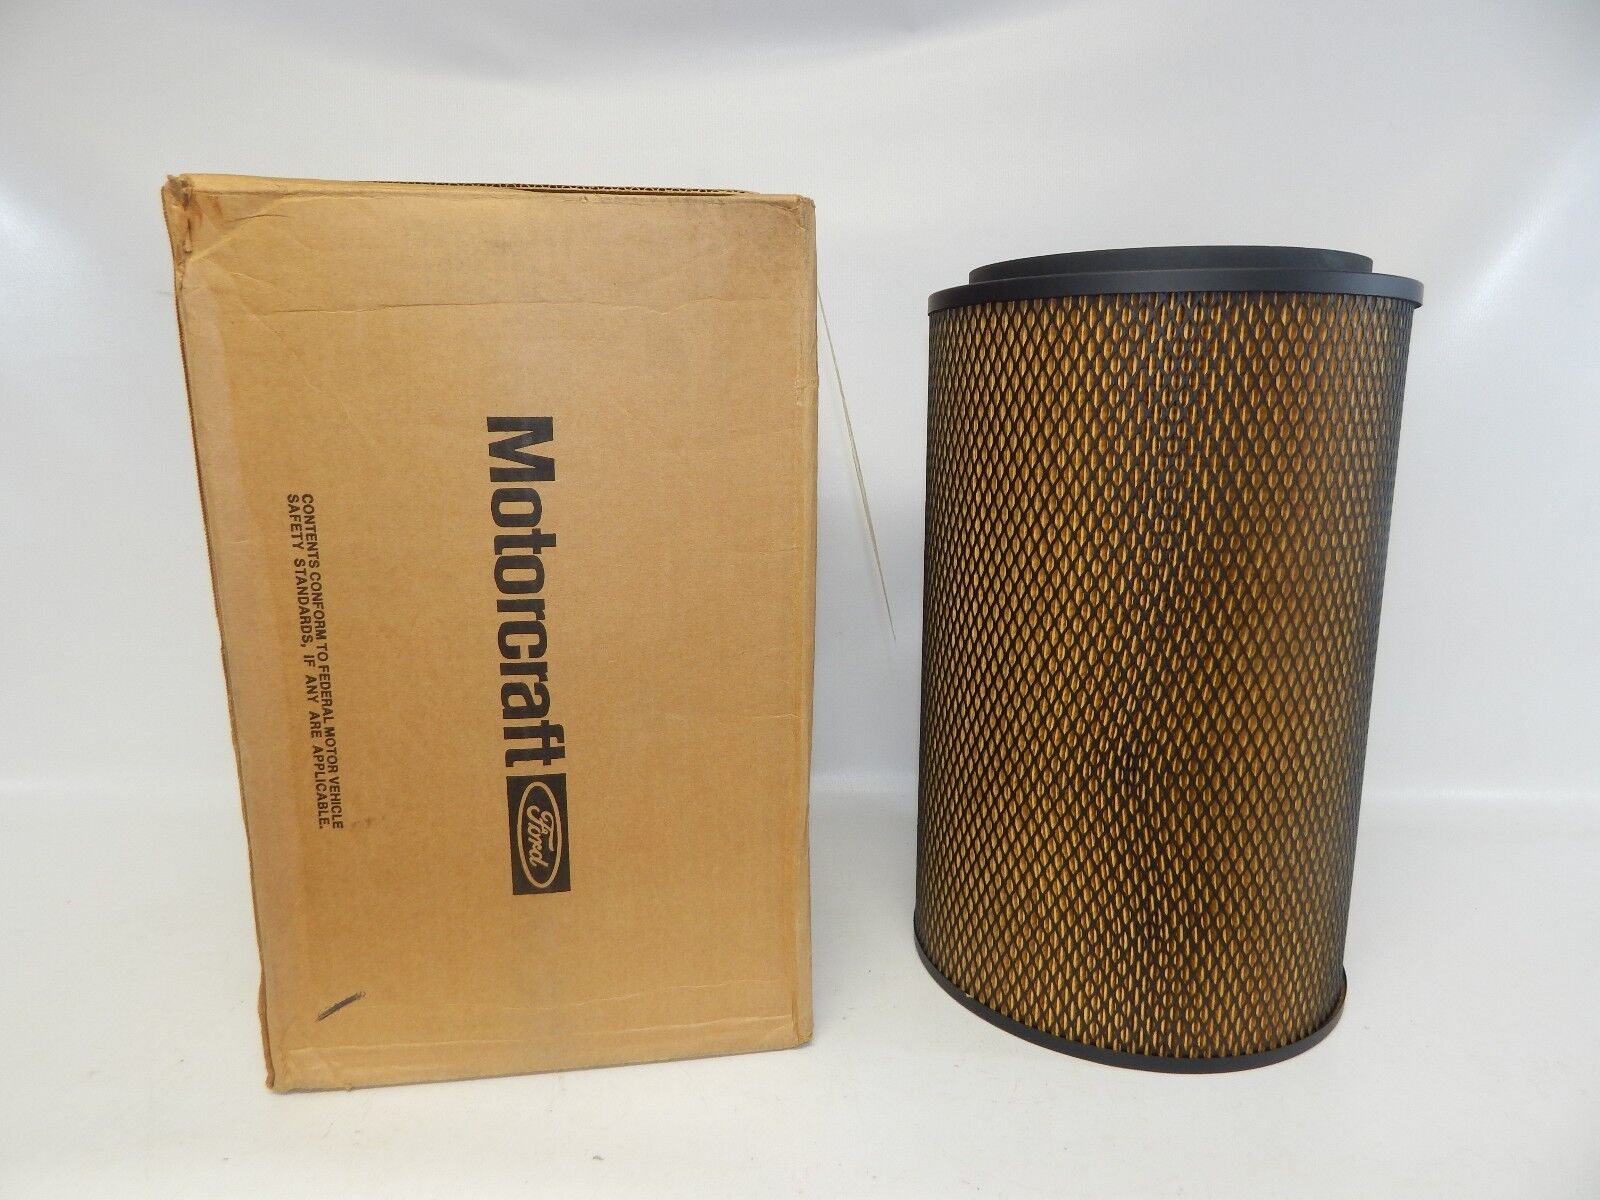 New OEM 1986 & Up Ford Heavy Truck Air Cleaner Element Filter FA1075 Motorcraft